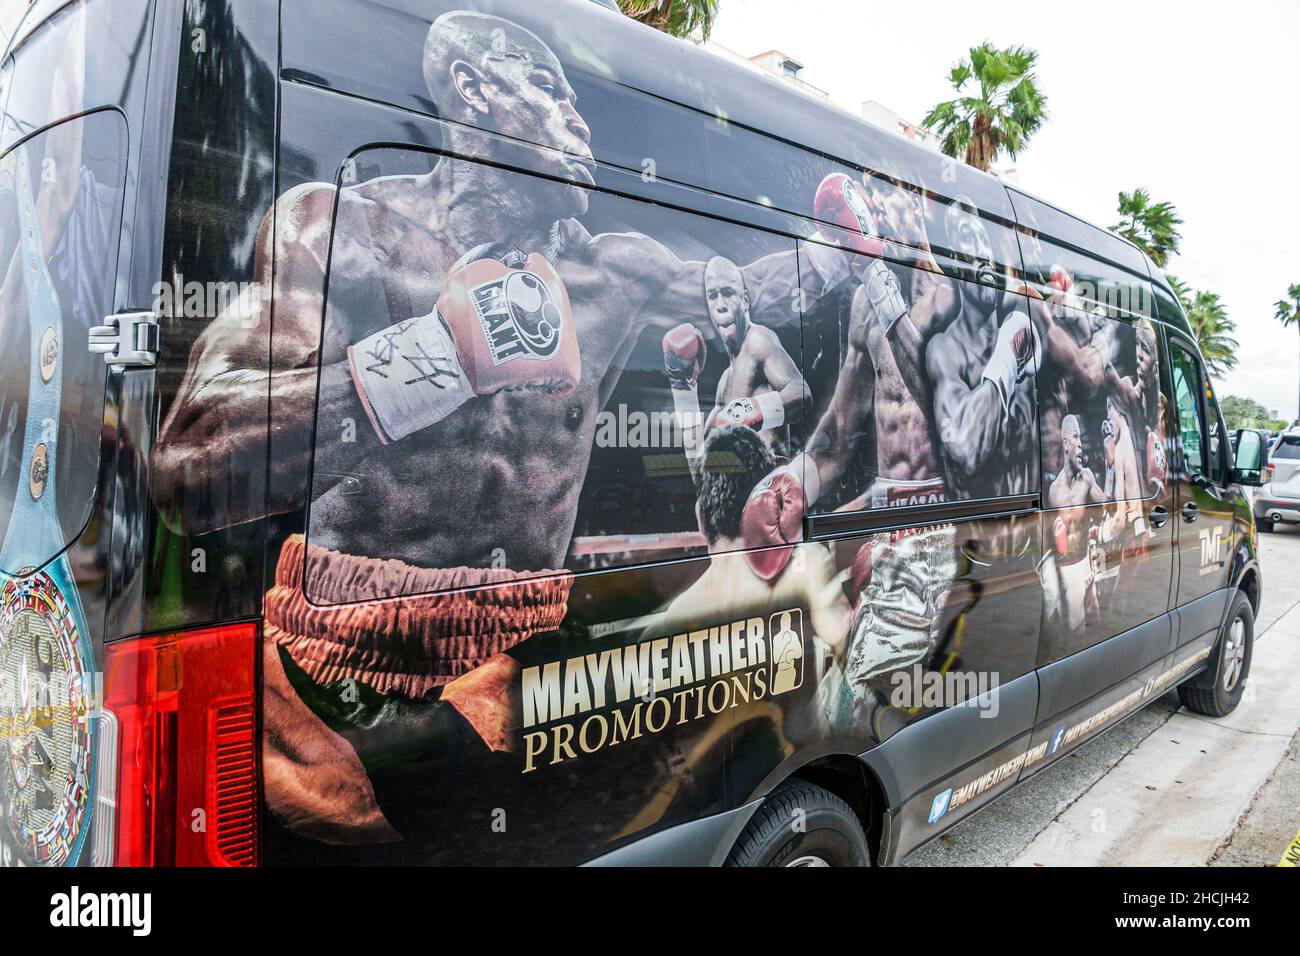 Miami Beach Florida Mayweather Promotions van advertising promoting  sporting events boxing Stock Photo - Alamy